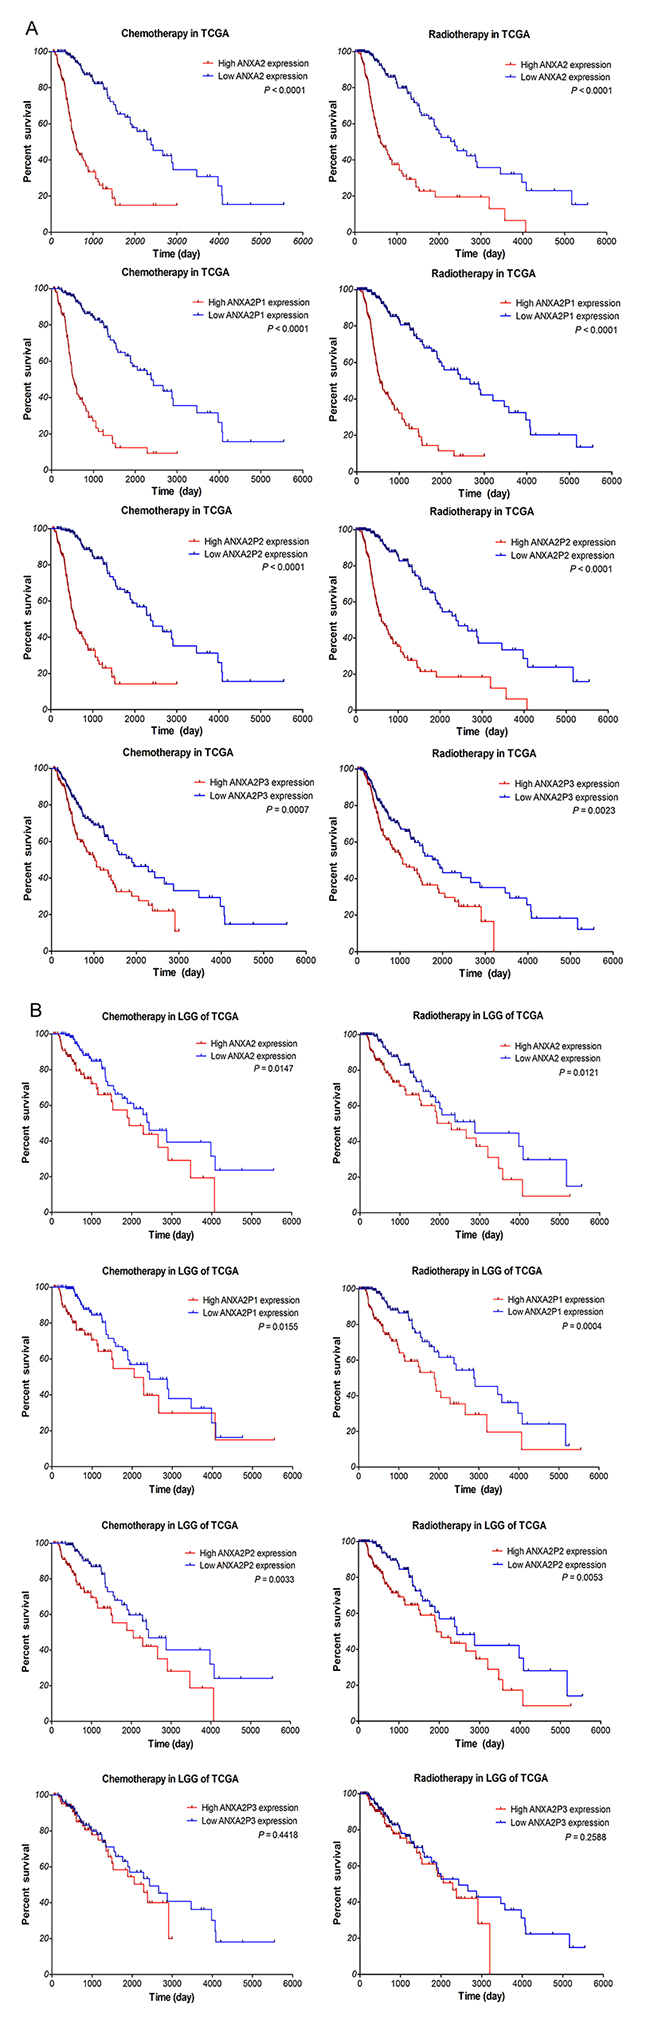 Kaplan&ndash;Meier survival curve analysis of glioma patients with chemotherapy or radiotherapy based on the expression of ANXA2 and ANXA2 pseudogenes.